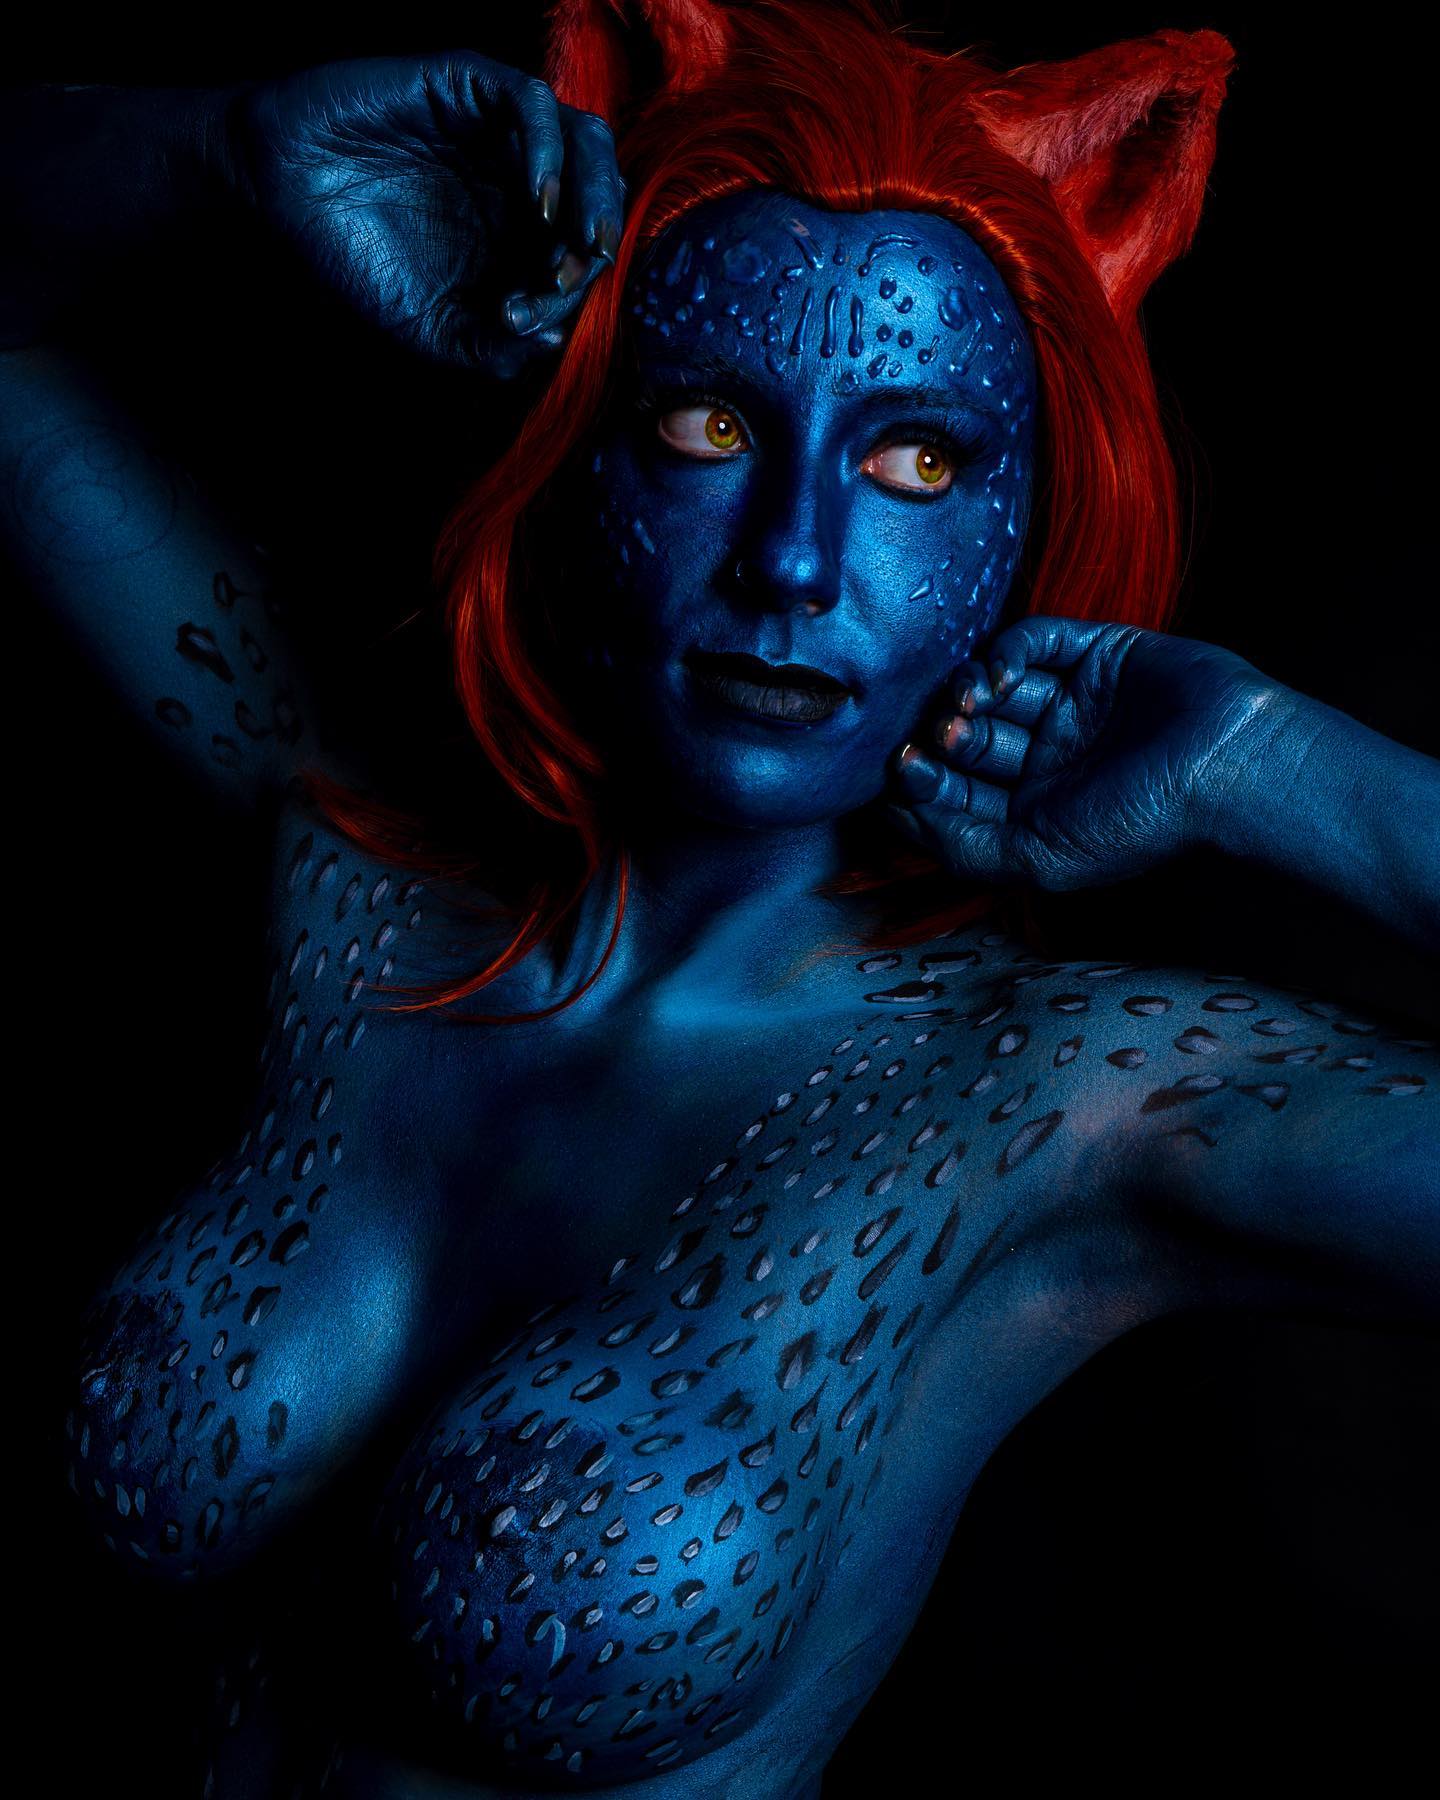 I can be whatever you want me to be.

Or maybe just your worst nightmare.
•
•
Bodypaint @castofthousandsstudio 
📷 @jessicajarmanphotography 
•
•
#mystiquecosplay #mystique #xmen #bodypaint #bodyart #art #nekocosplay